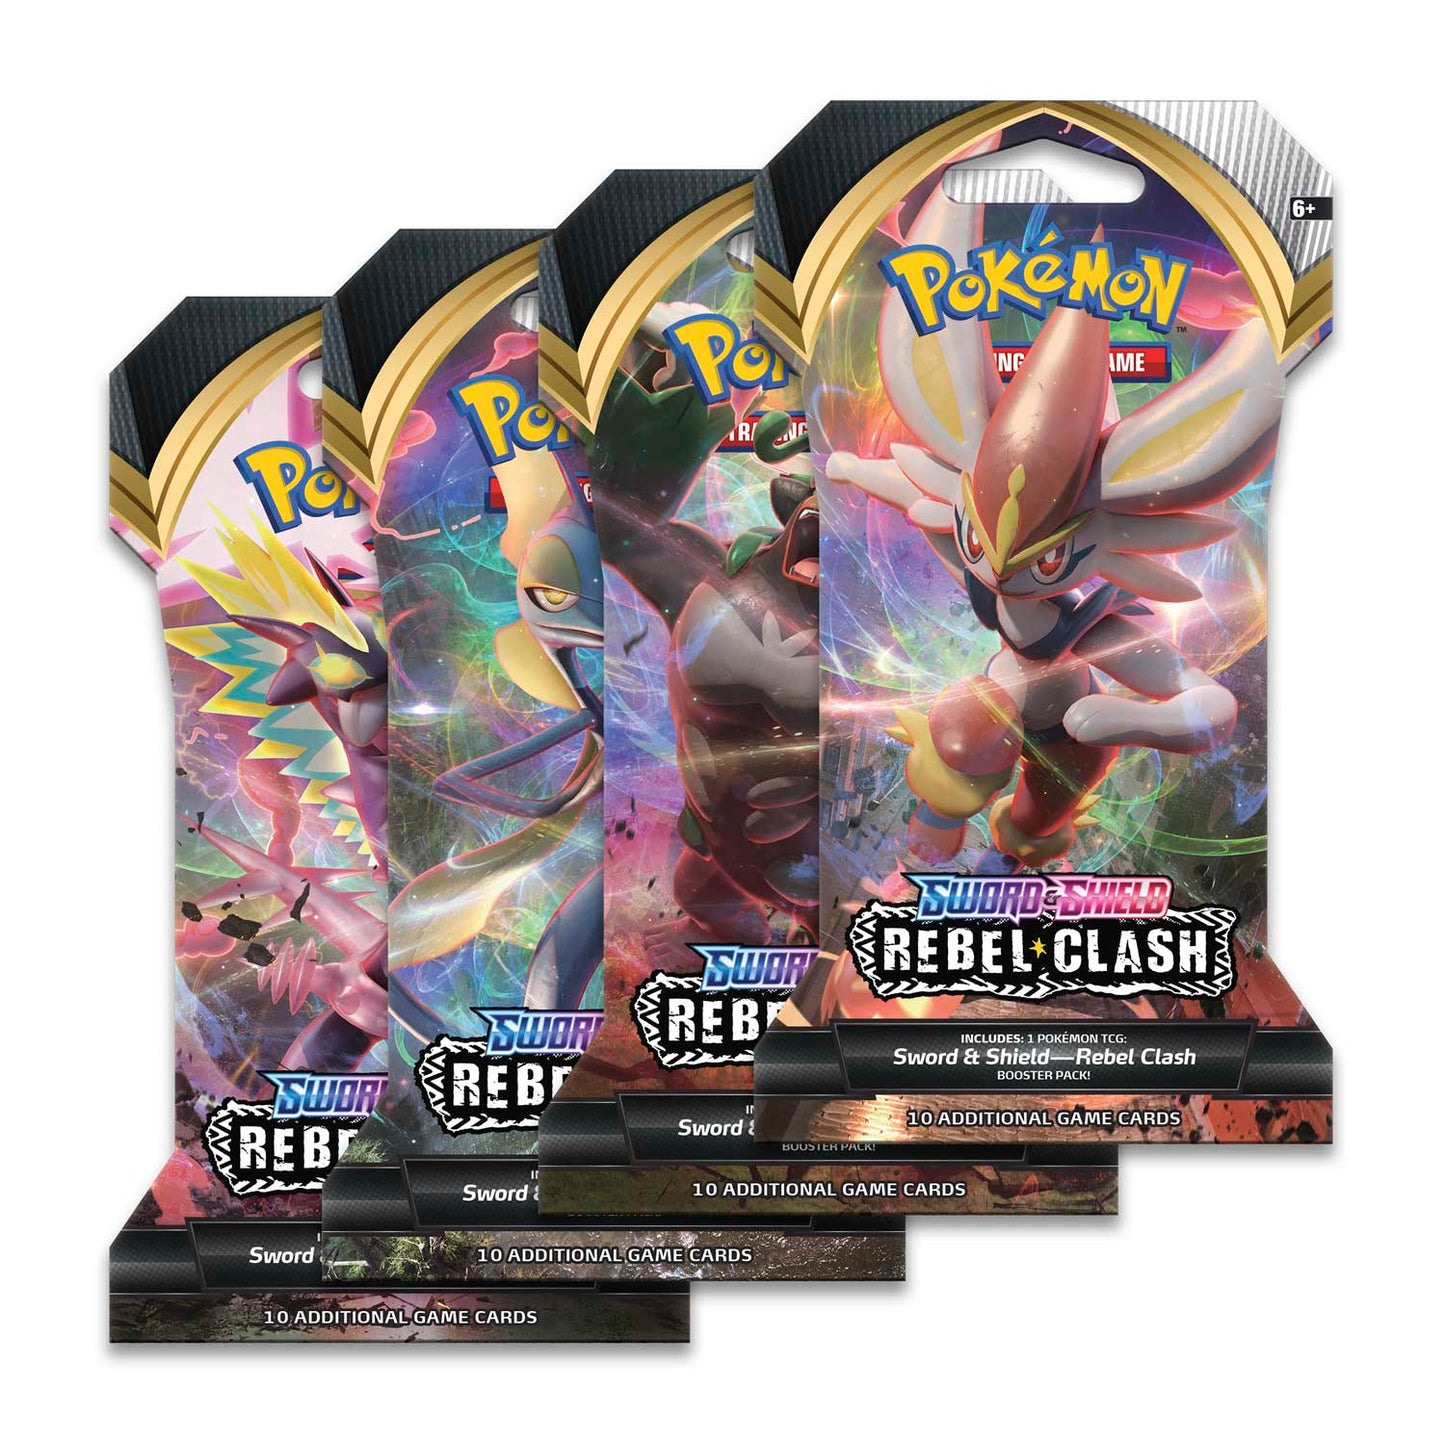 Pokémon TCG: Sword & Shield-Rebel Clash Sleeved Booster Pack (10 Cards) Super Anime Store 